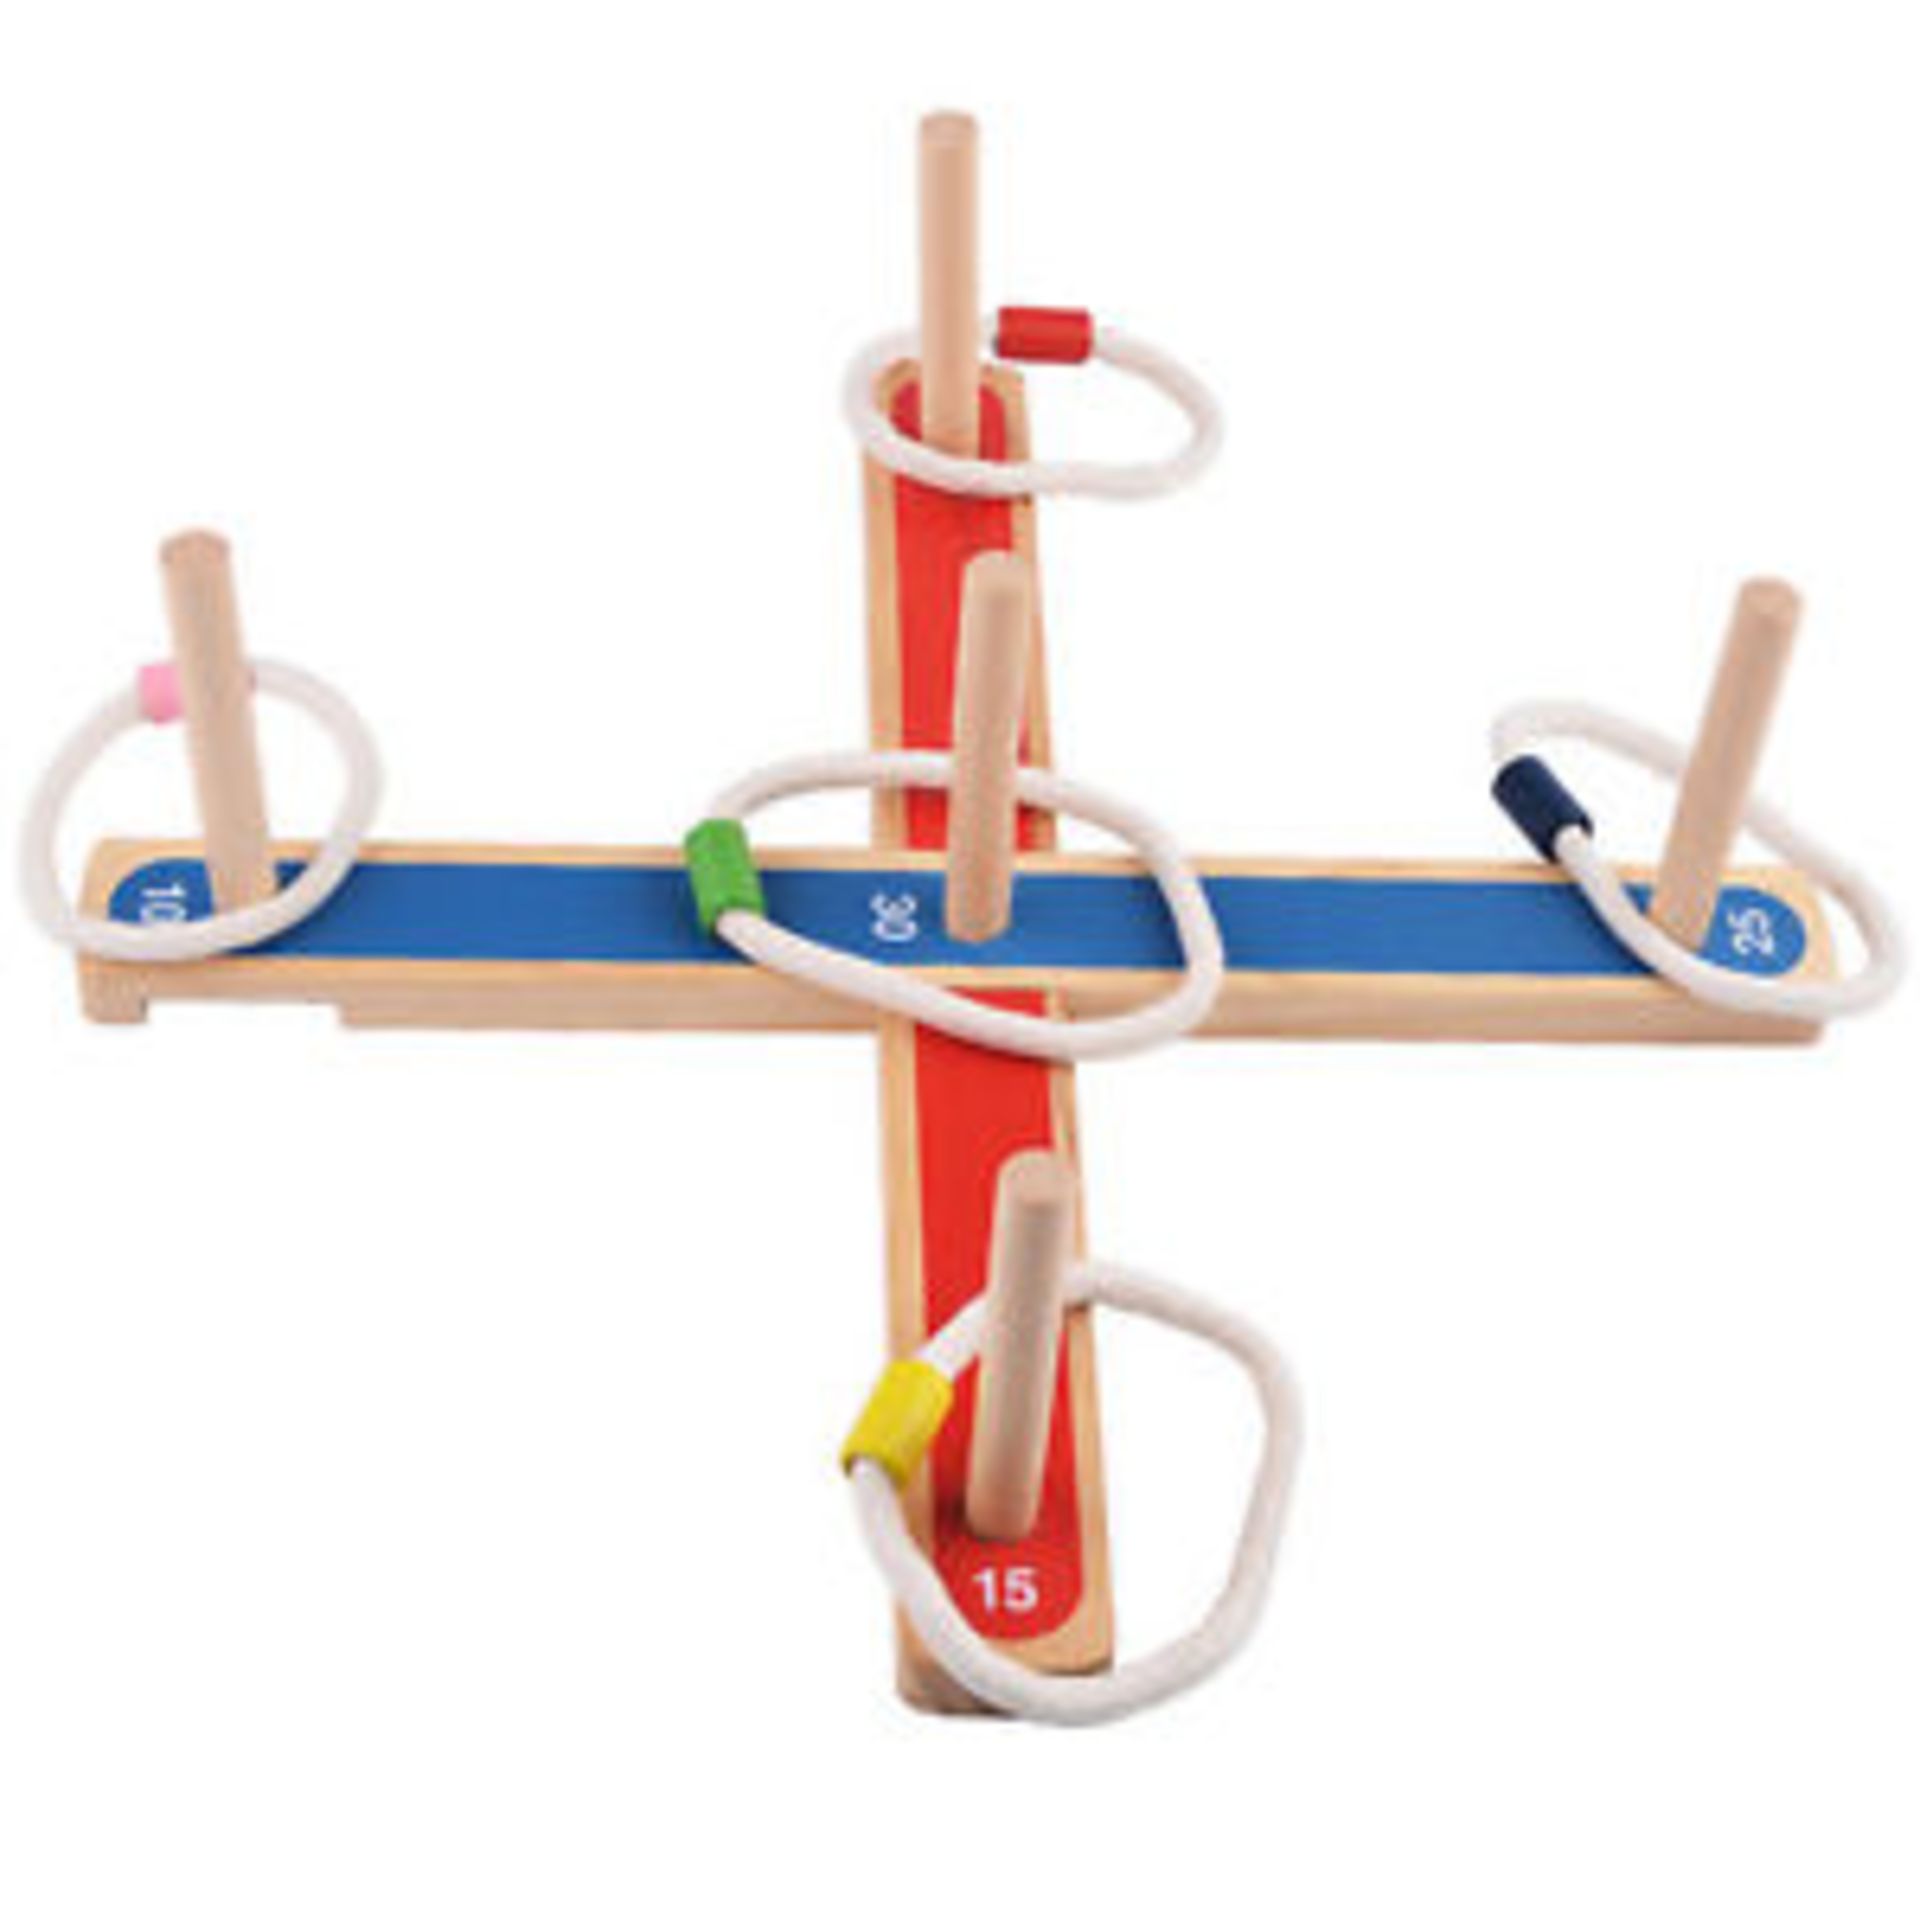 V *TRADE QTY* Brand New Wooden Ring Toss Set (Image is Similar) X 4 YOUR BID PRICE TO BE